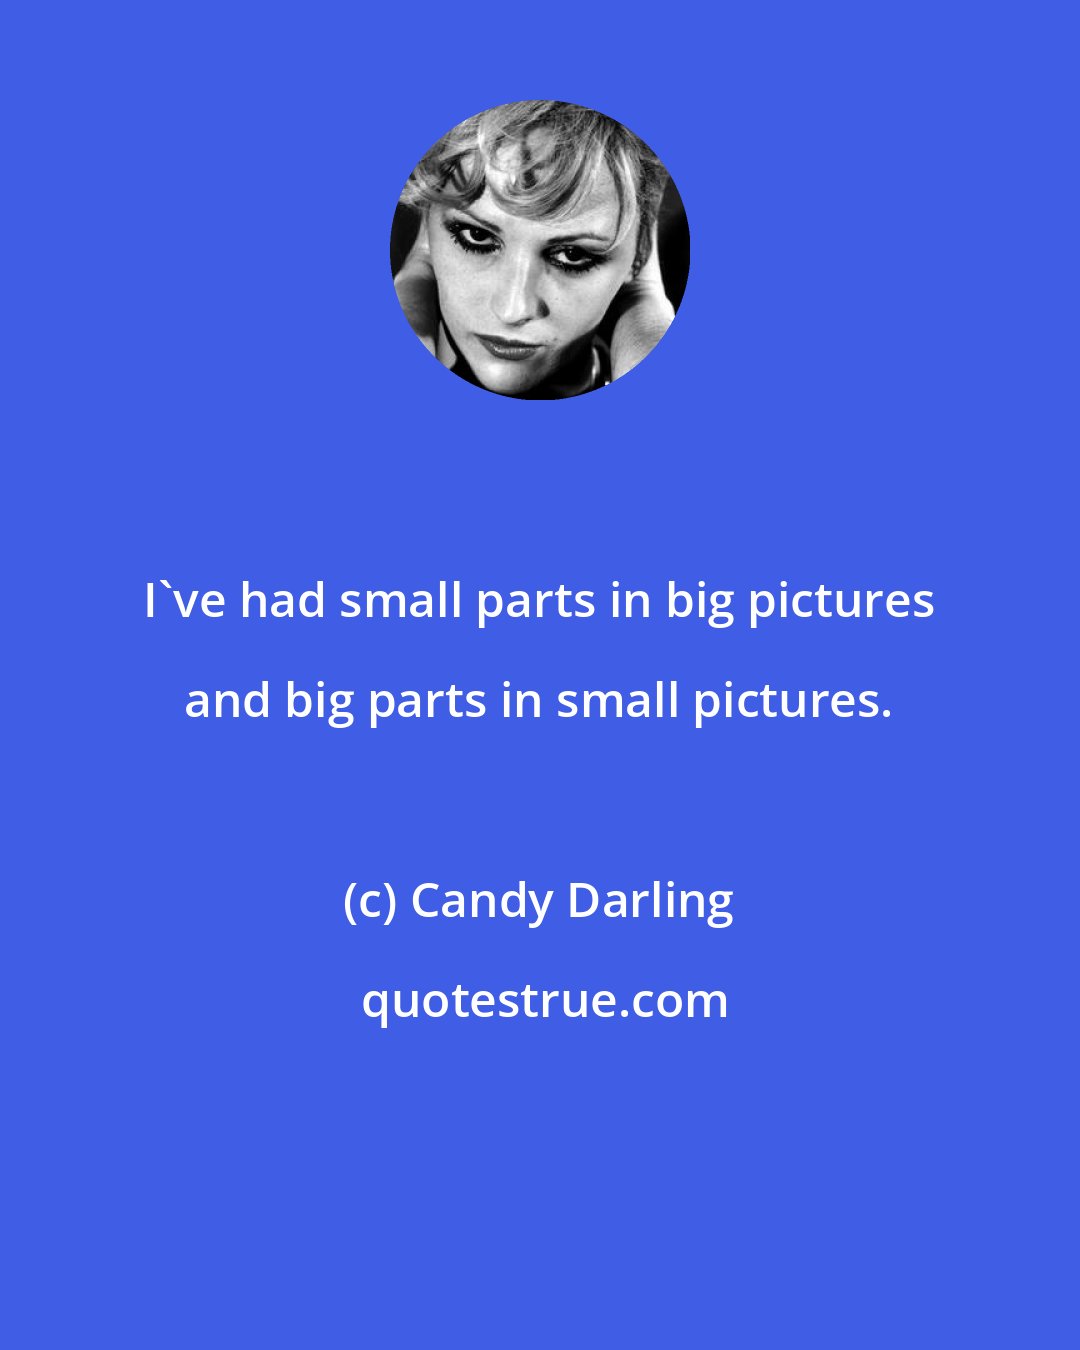 Candy Darling: I've had small parts in big pictures and big parts in small pictures.